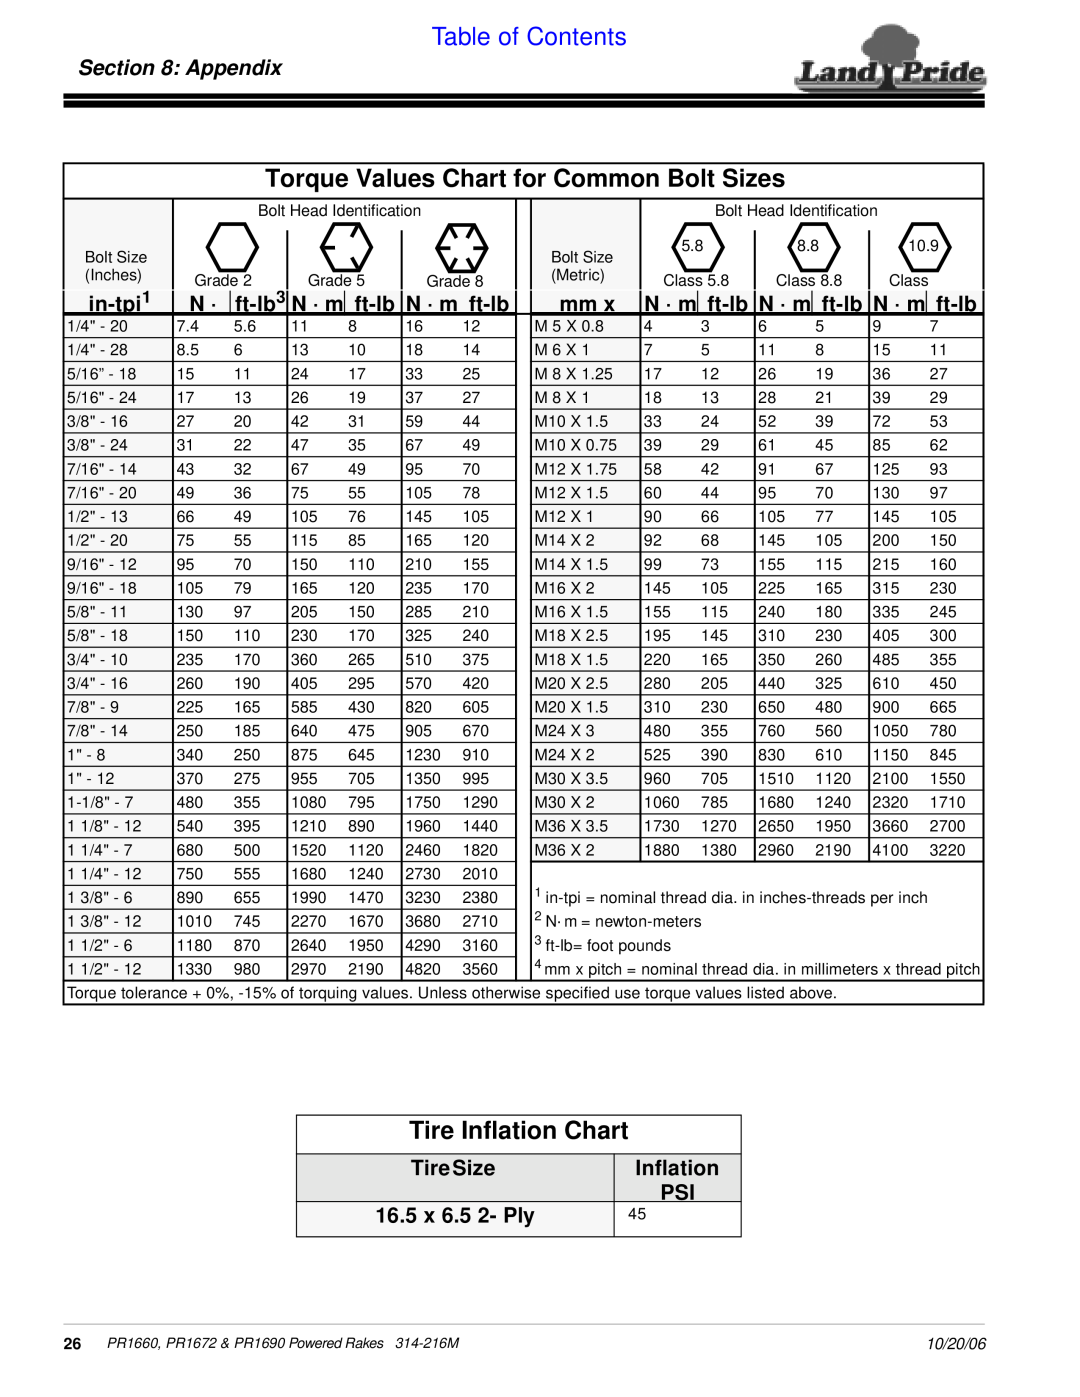 Land Pride PR1672 manual Torque Values Chart for Common Bolt Sizes, Tire Inflation Chart, Appendix, Table of Contents 